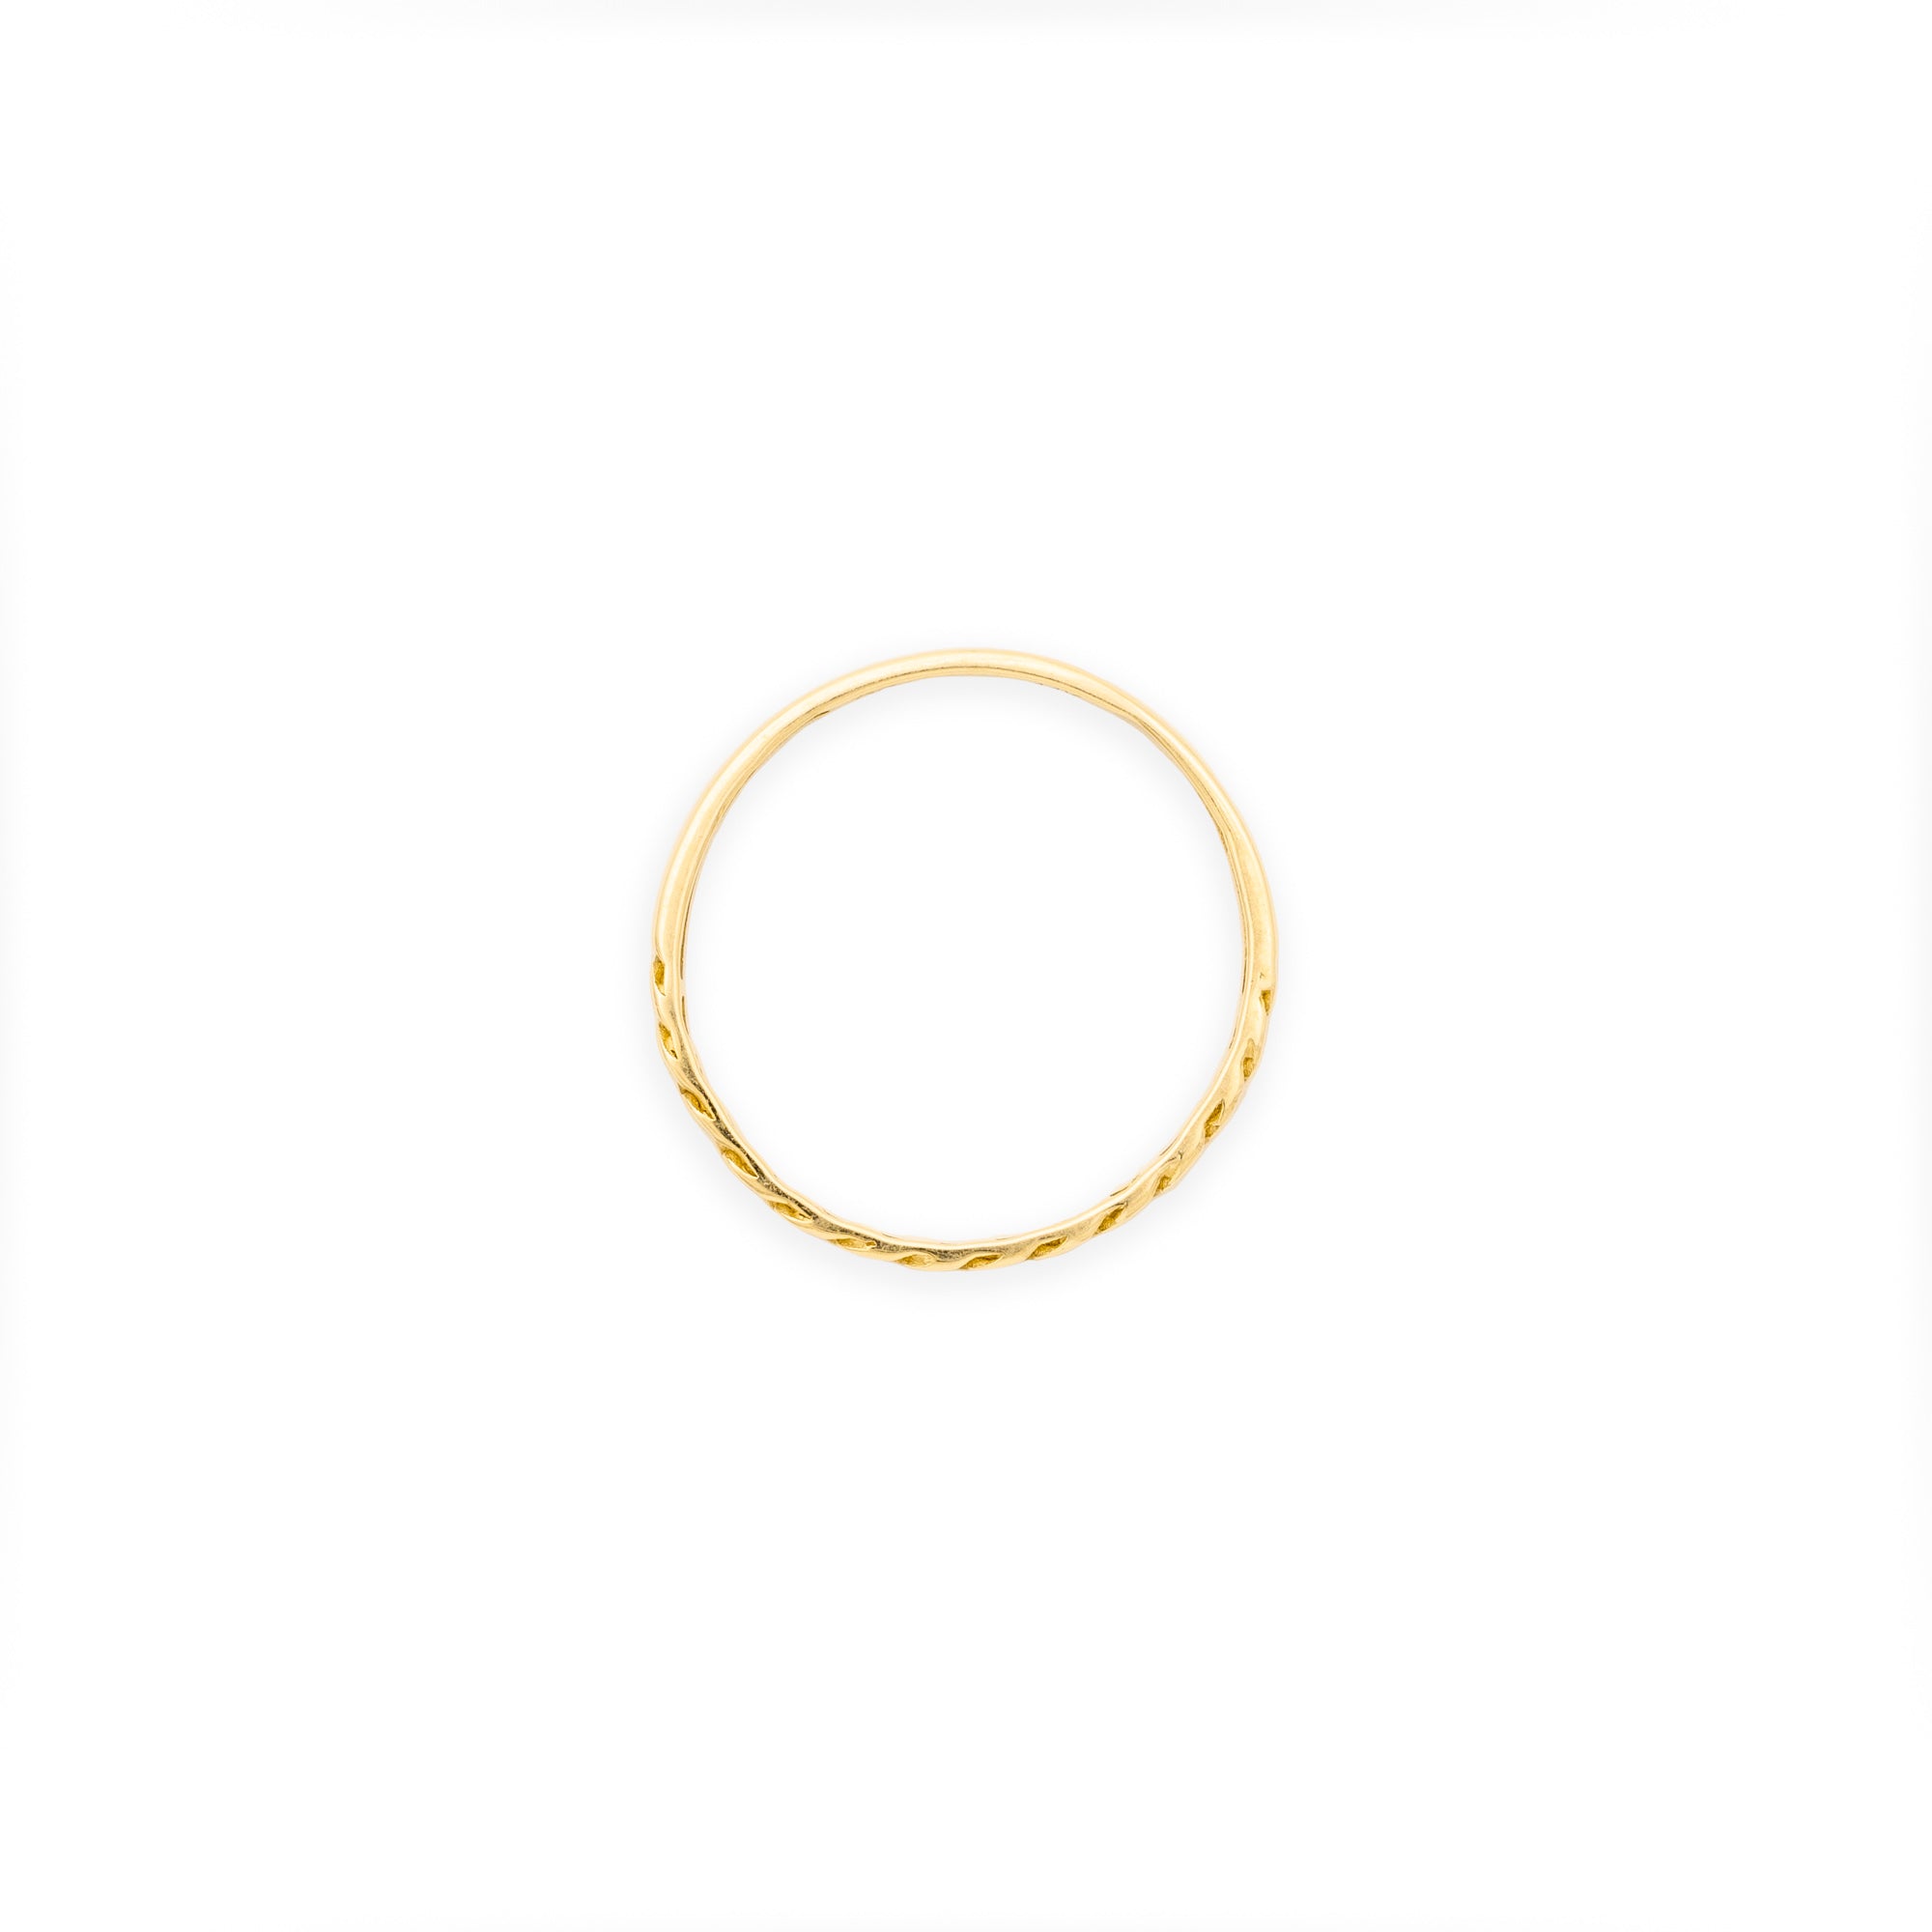 Daisy 14k Yellow Gold Link Band Ring